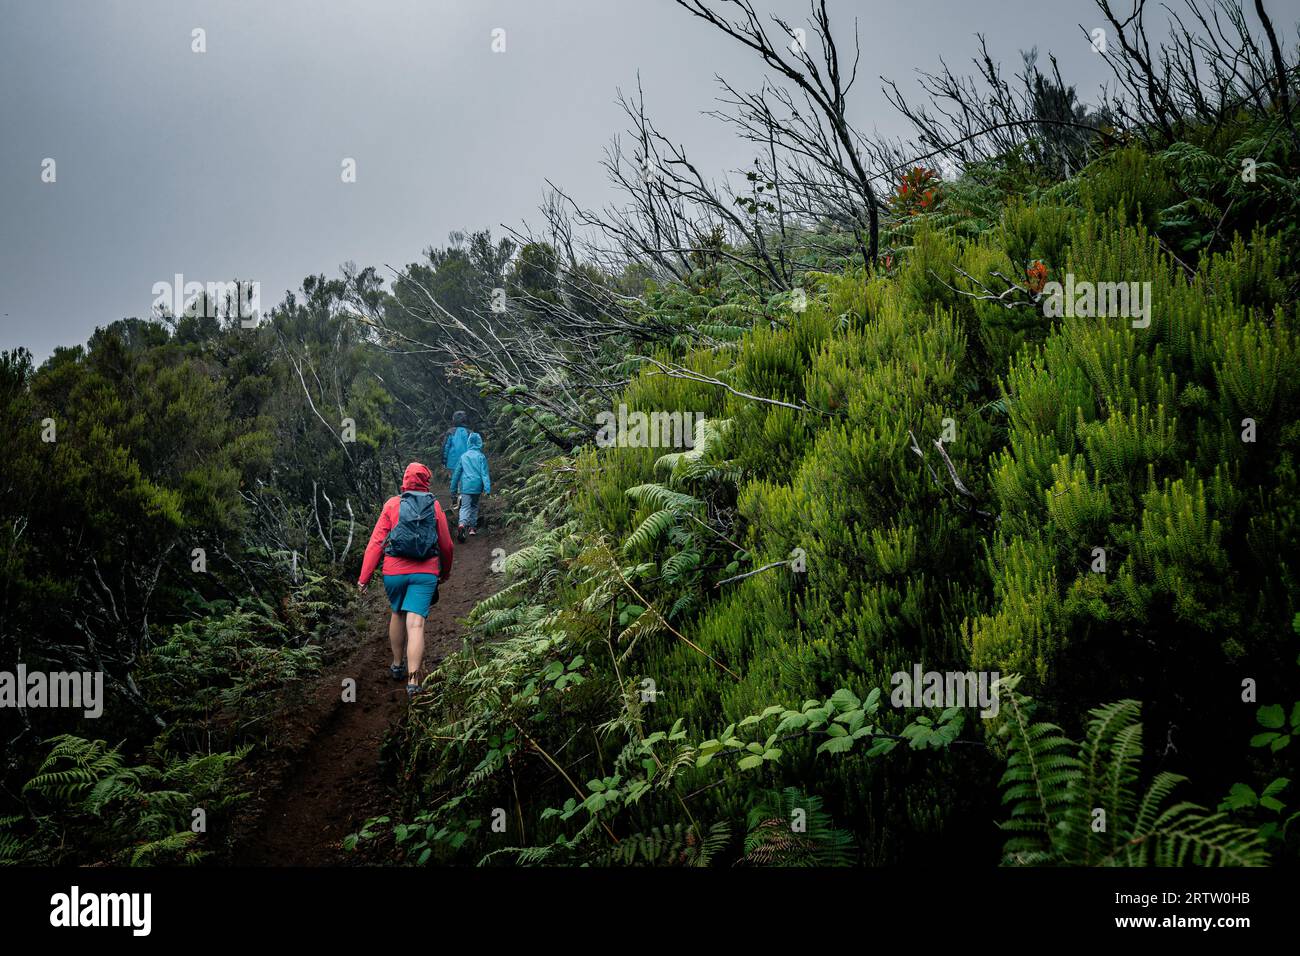 View of a family walking through the densely vegetated hills of Fanal forest on Madeira, Portugal, as the mist mystically creeps in from all sides Stock Photo